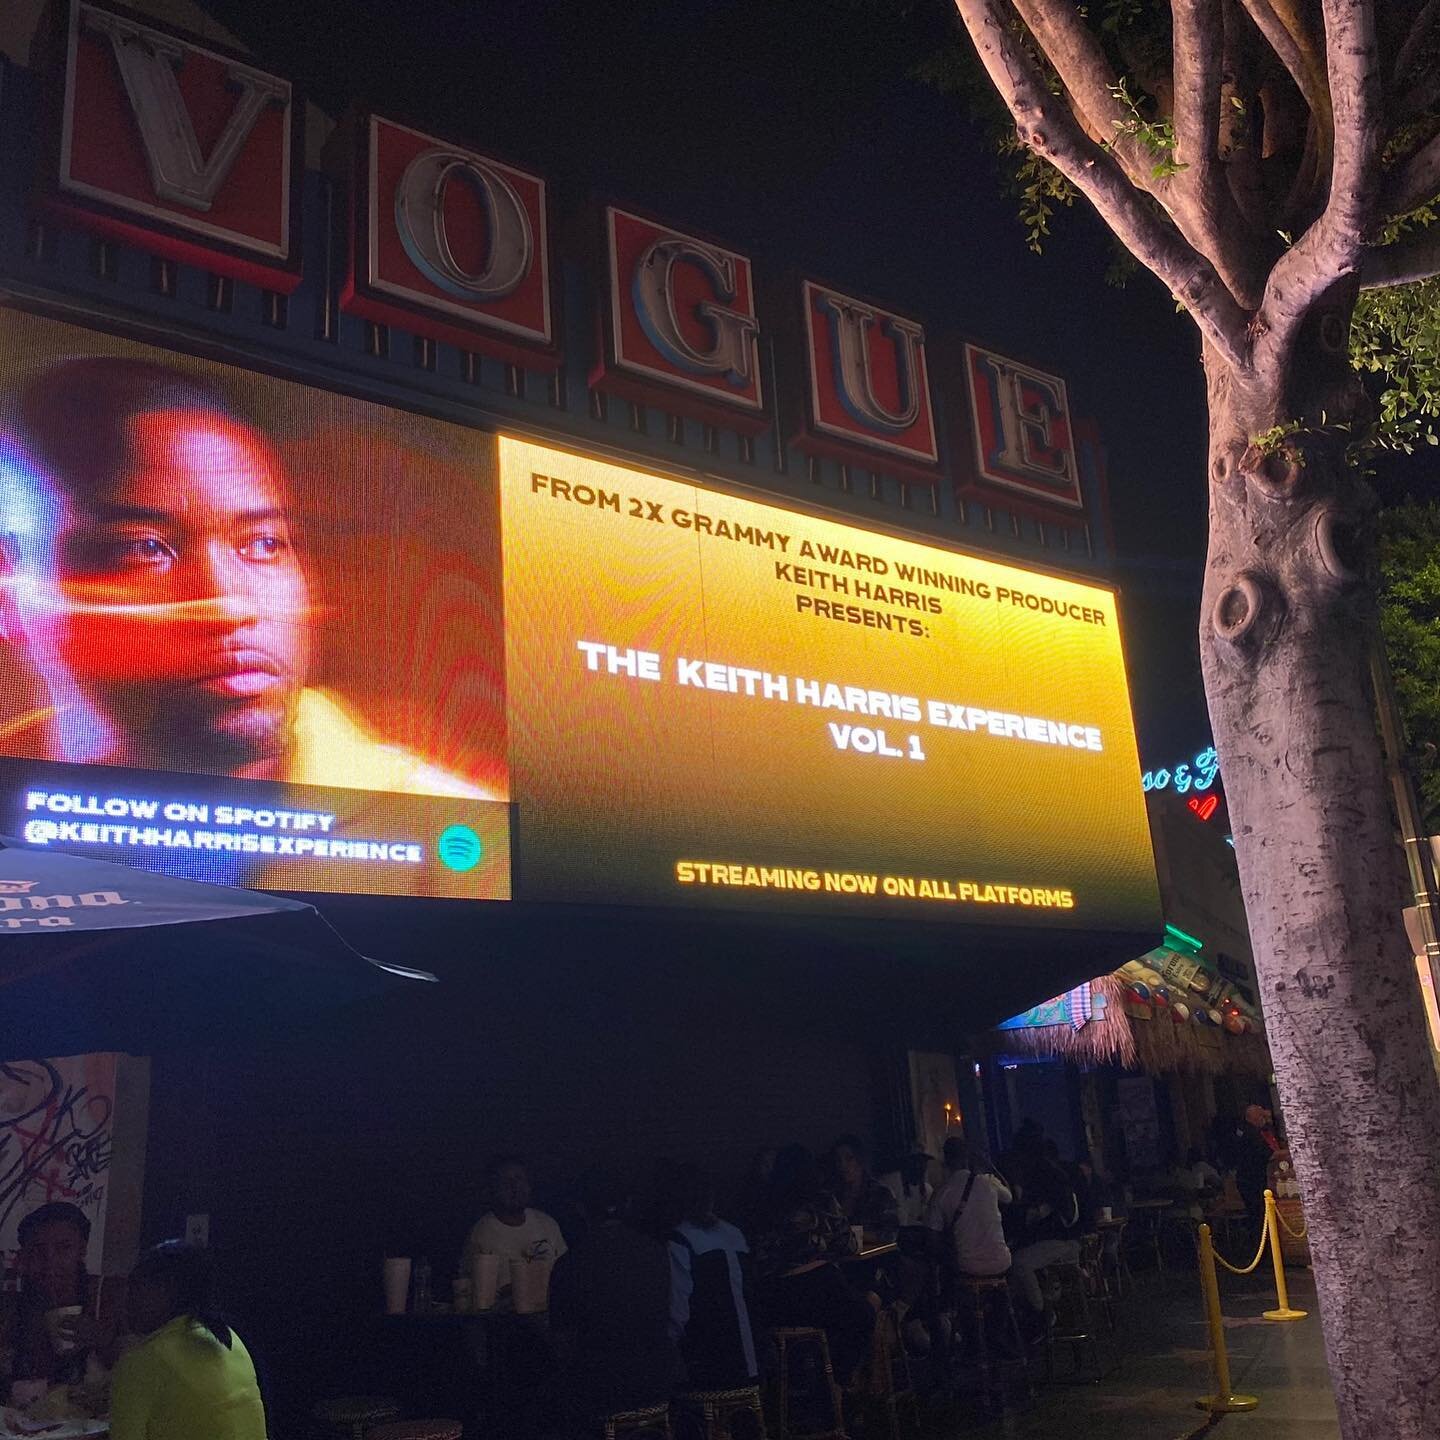 So my sister @harrischanji did it again!!! If you&rsquo;re in Hollywood make sure you checkout my digital billboard on Hollywood Blvd and Las Palmas!! Super excited to see it here in LA and the heart of Hollywood!! @chiefwakil @taylergreen @therealch